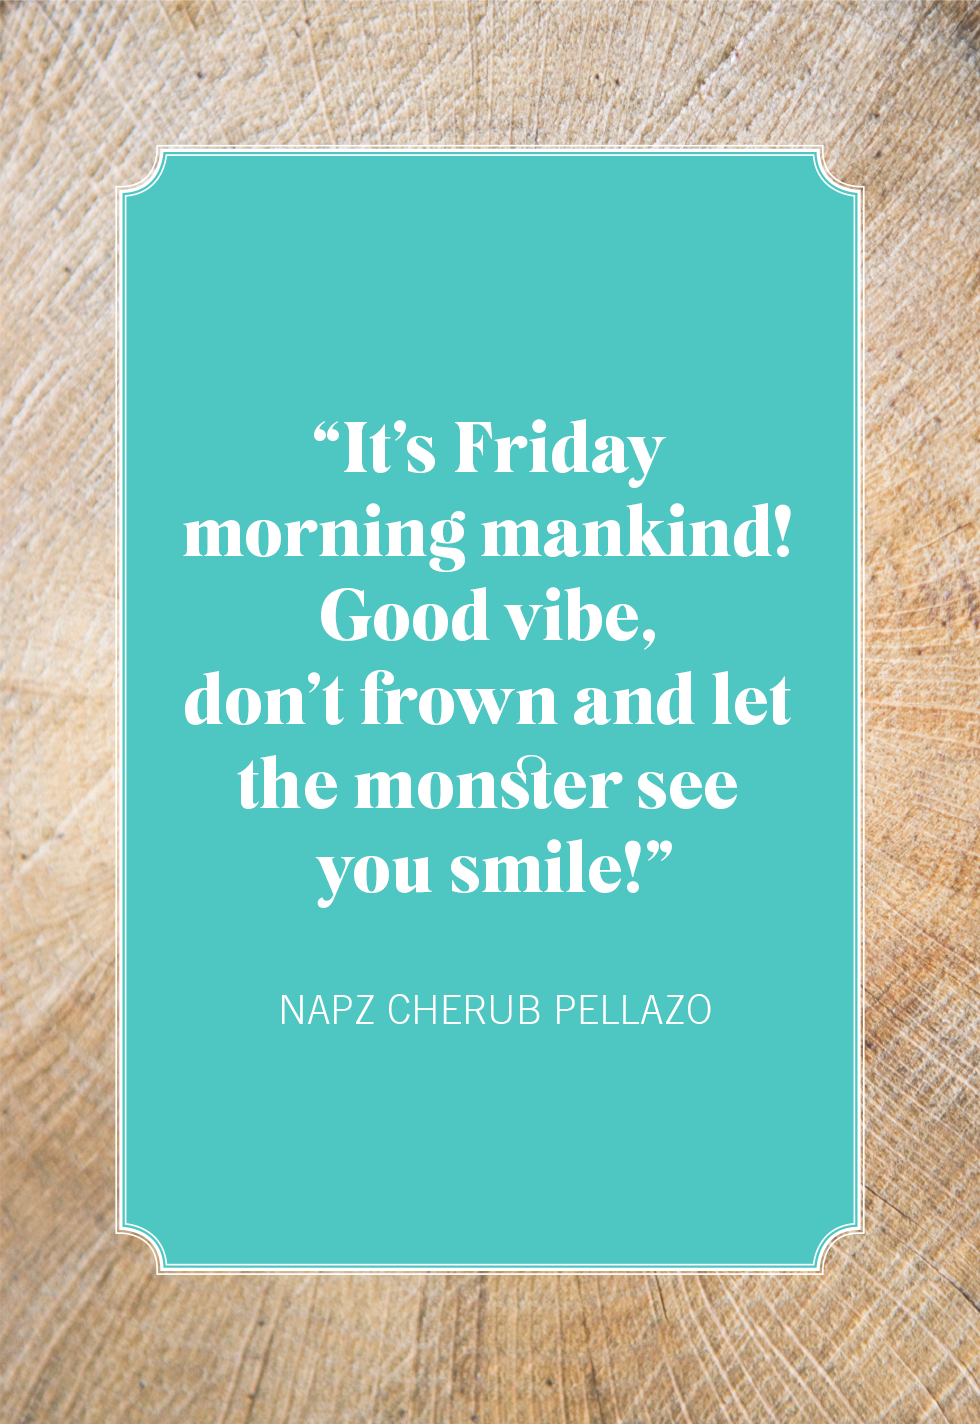 friday morning quotes and sayings